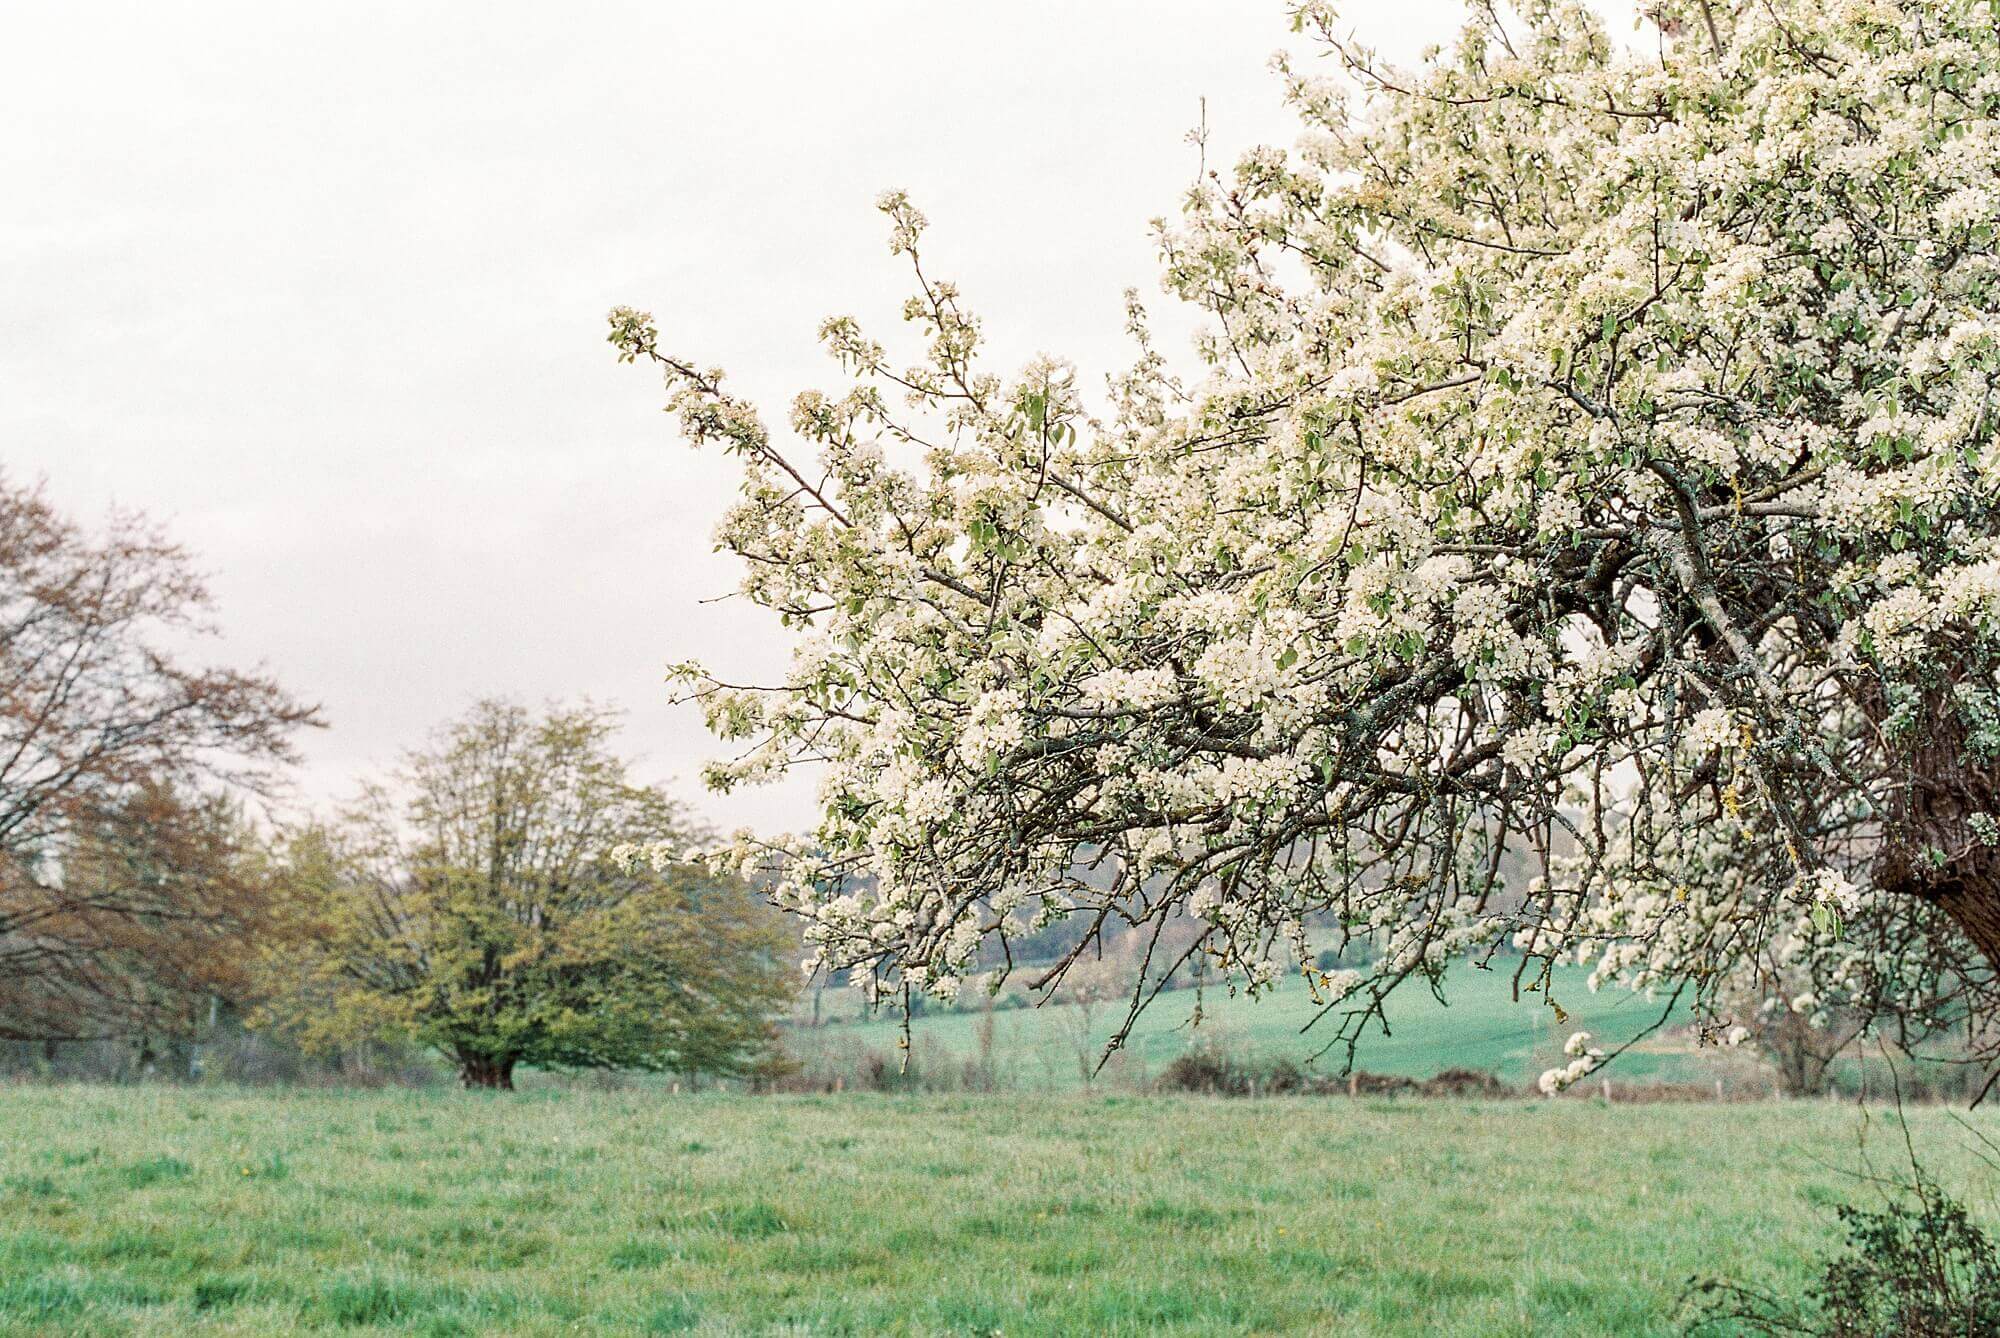 A pear tree blossoms in a grassy field in Normandy during the COVID-19 quarantine in France.